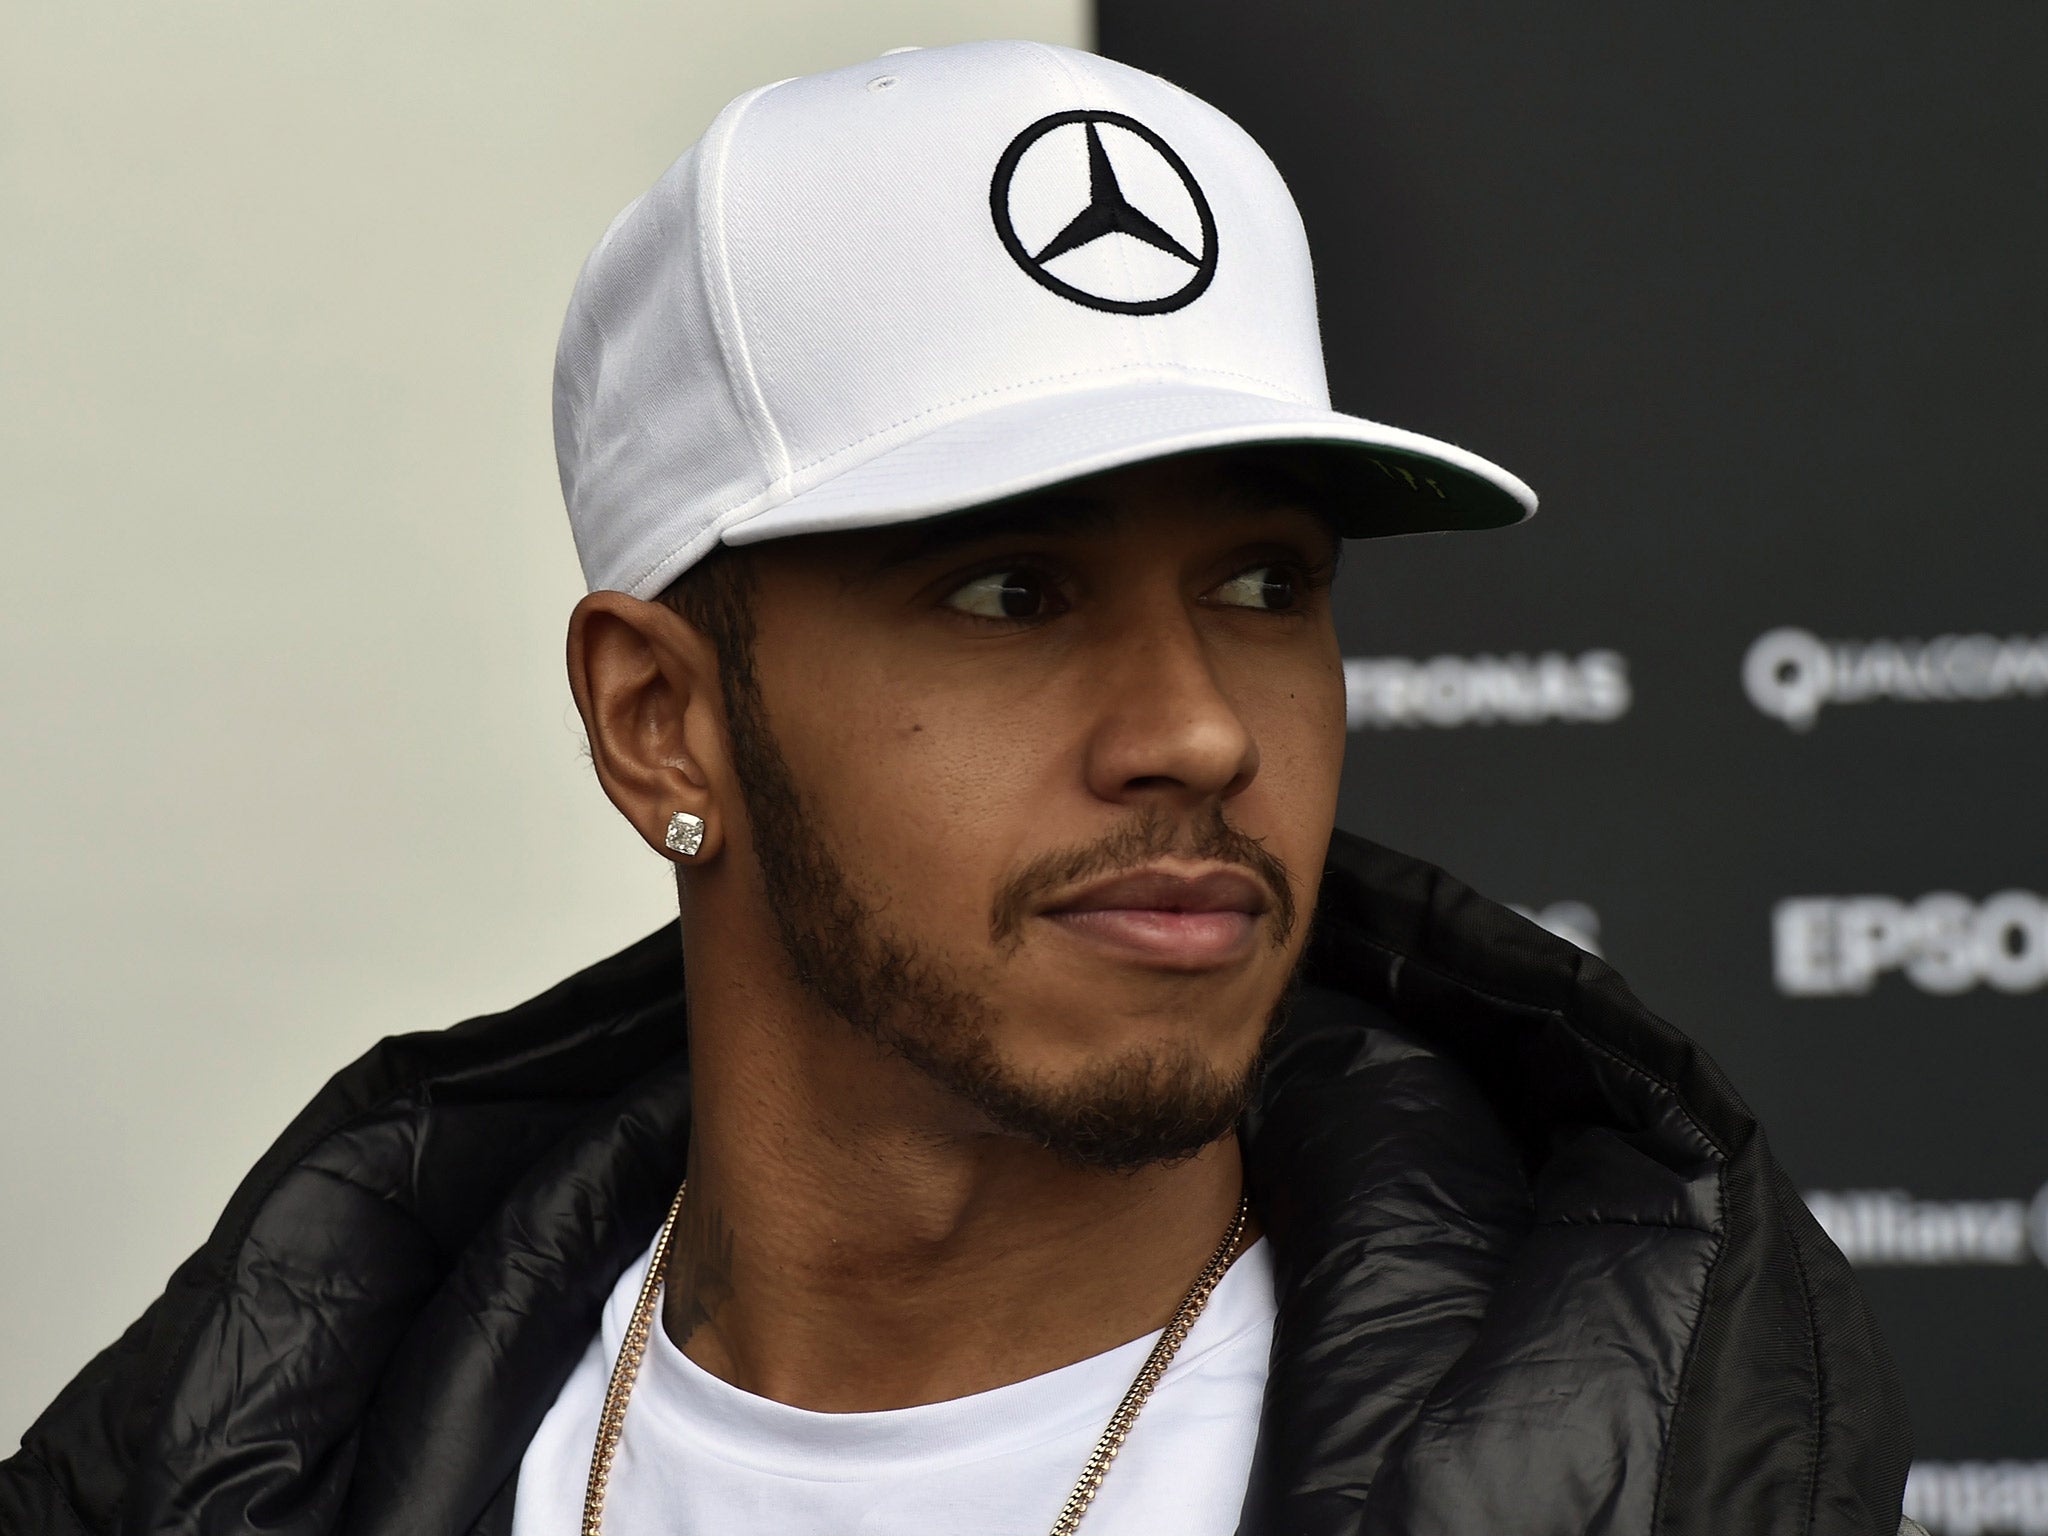 Lewis Hamilton knows that he needs a miracle to win the 2016 Formula 1 world championship